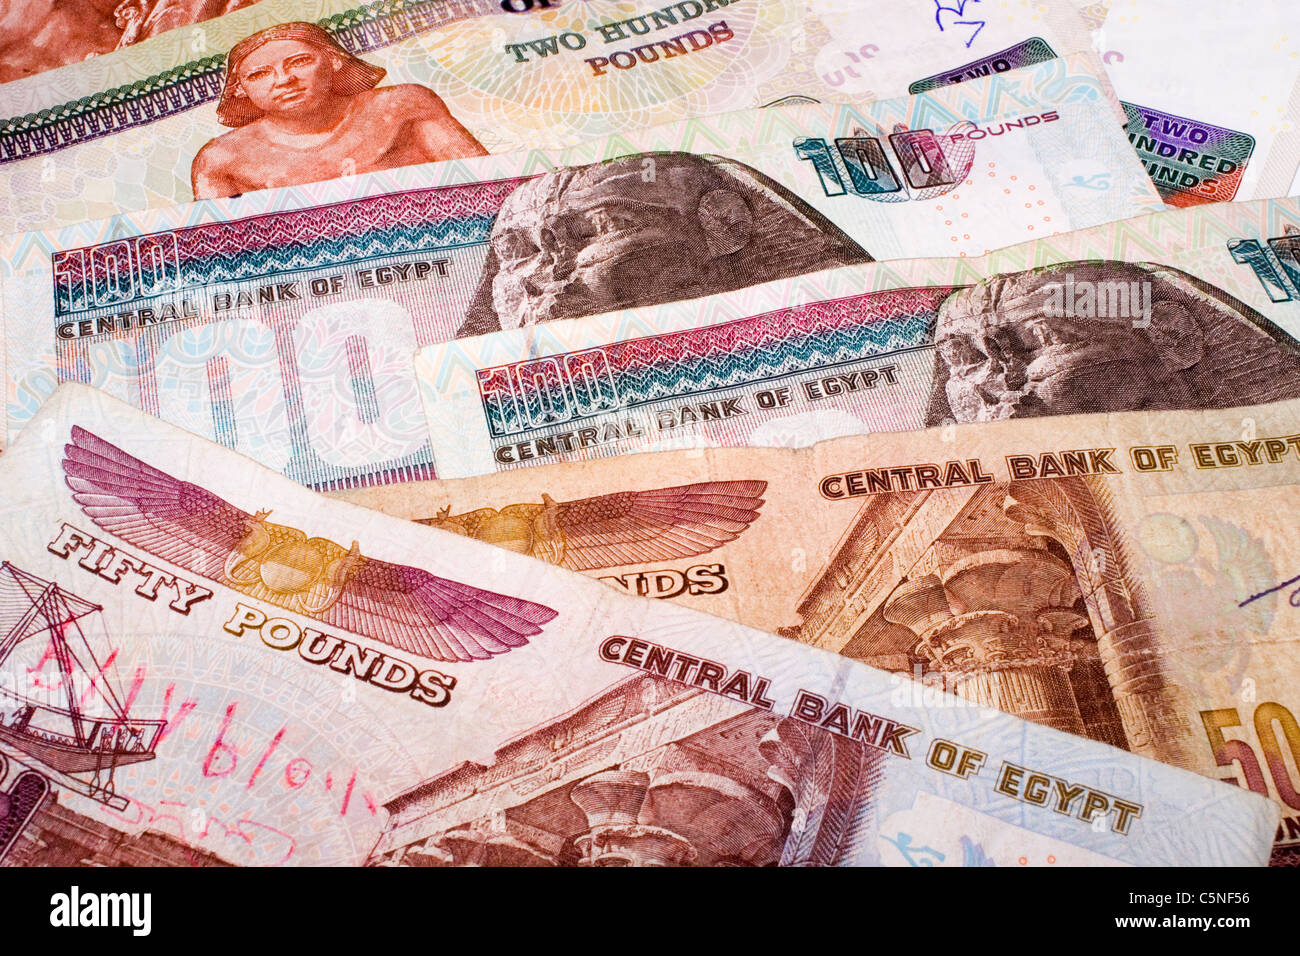 Display of Egyptian currency Stock Photo